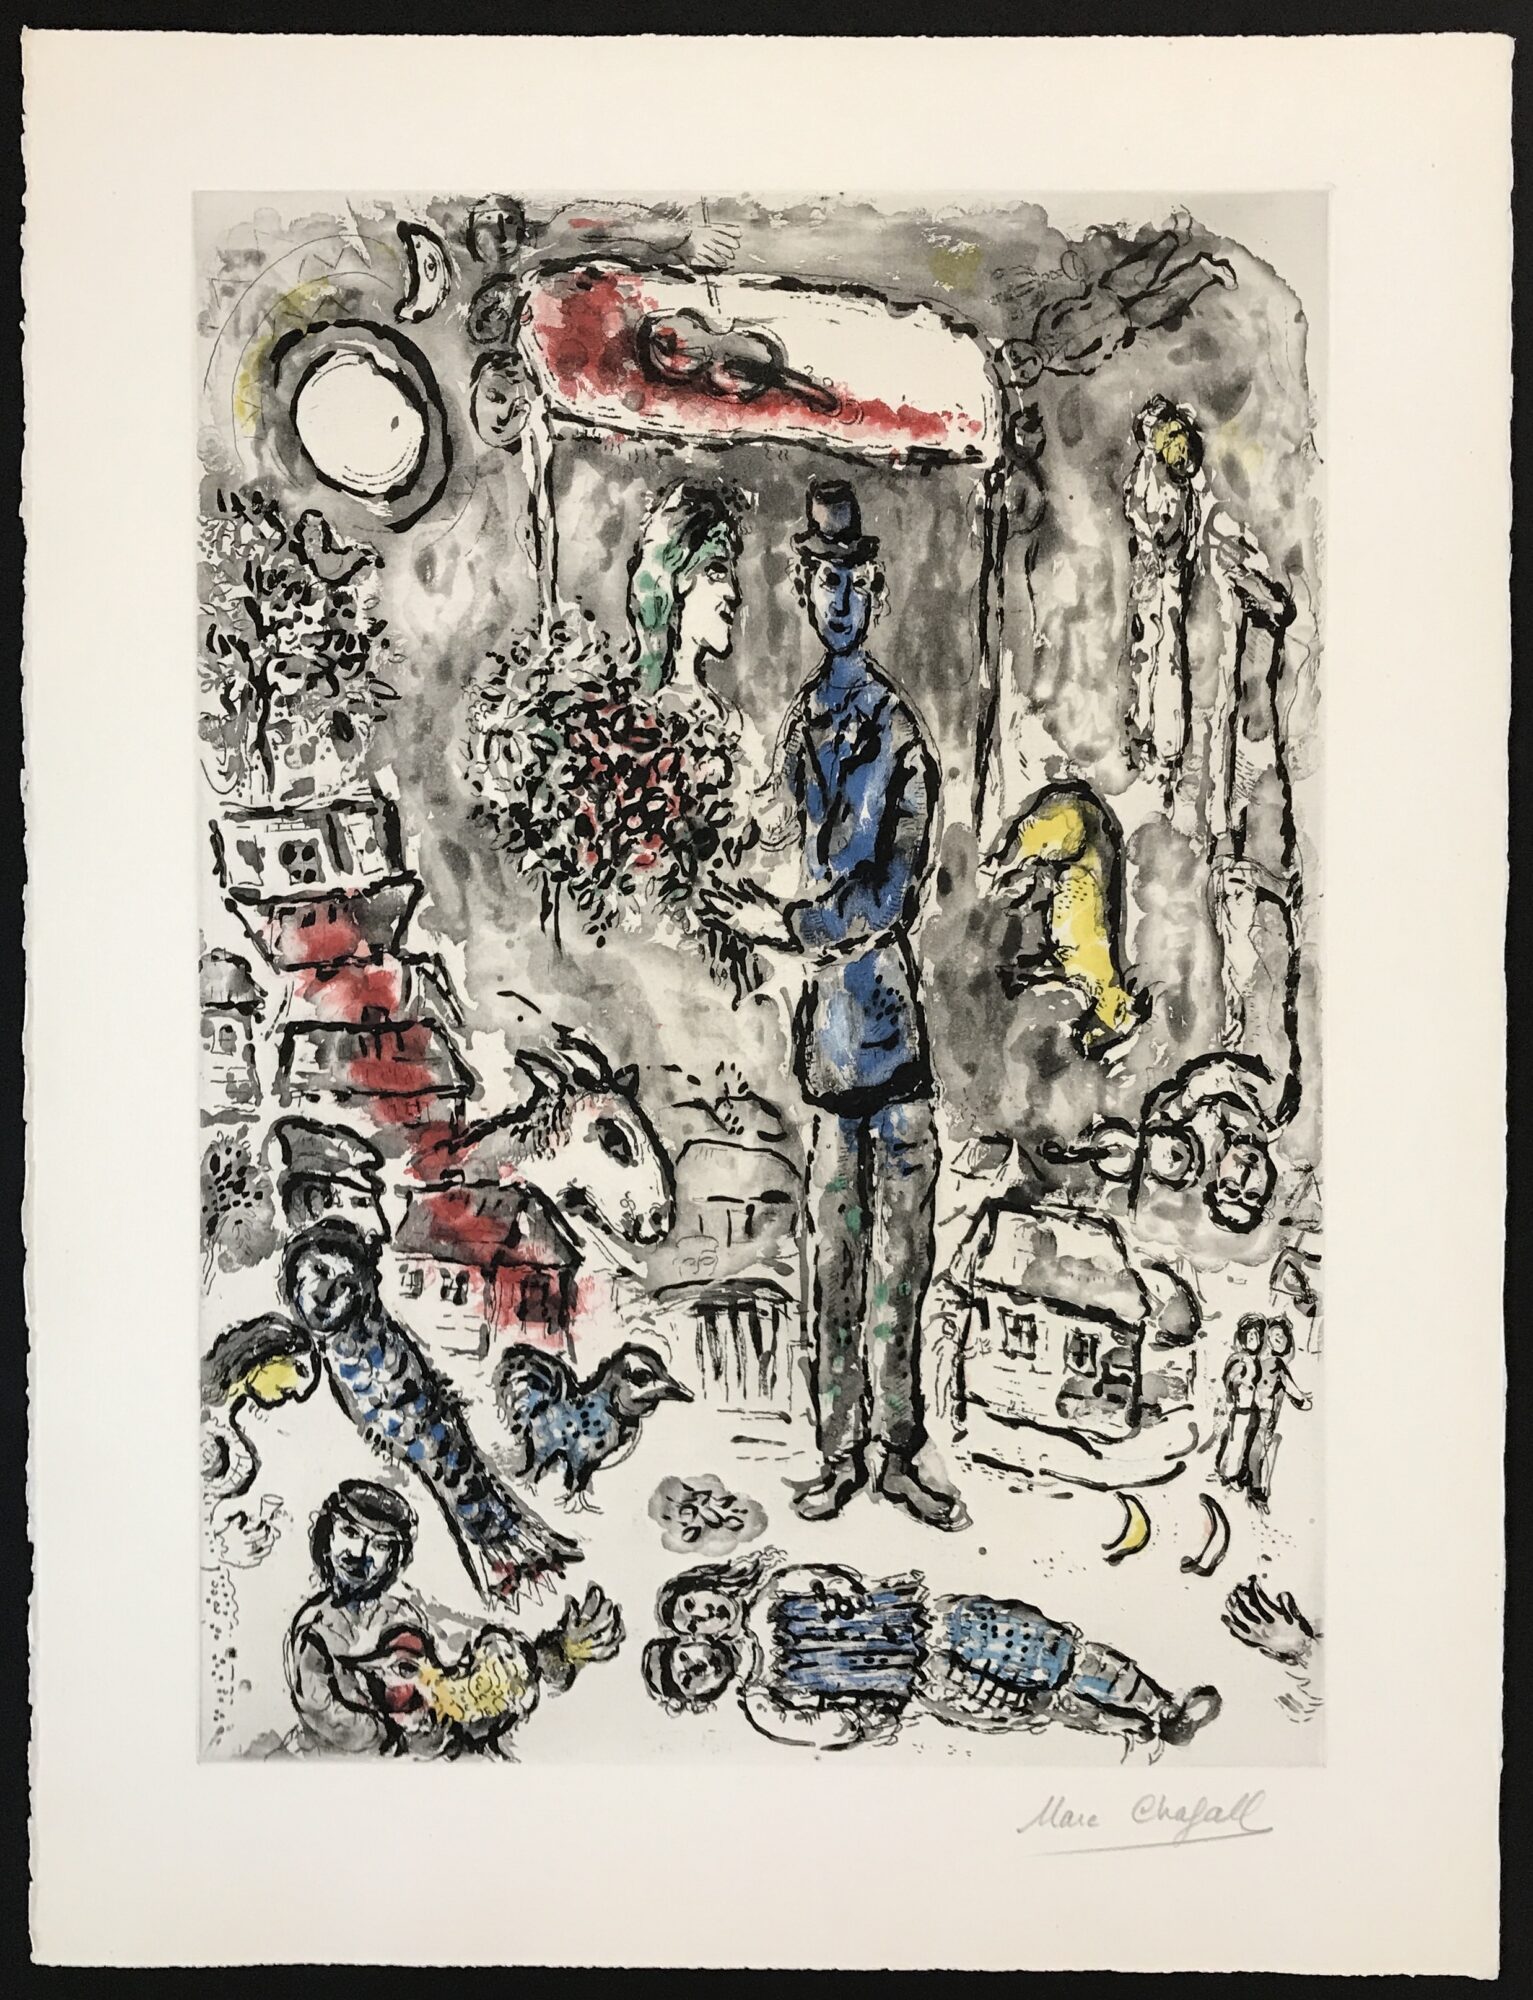 The Life and Art of Marc Chagall